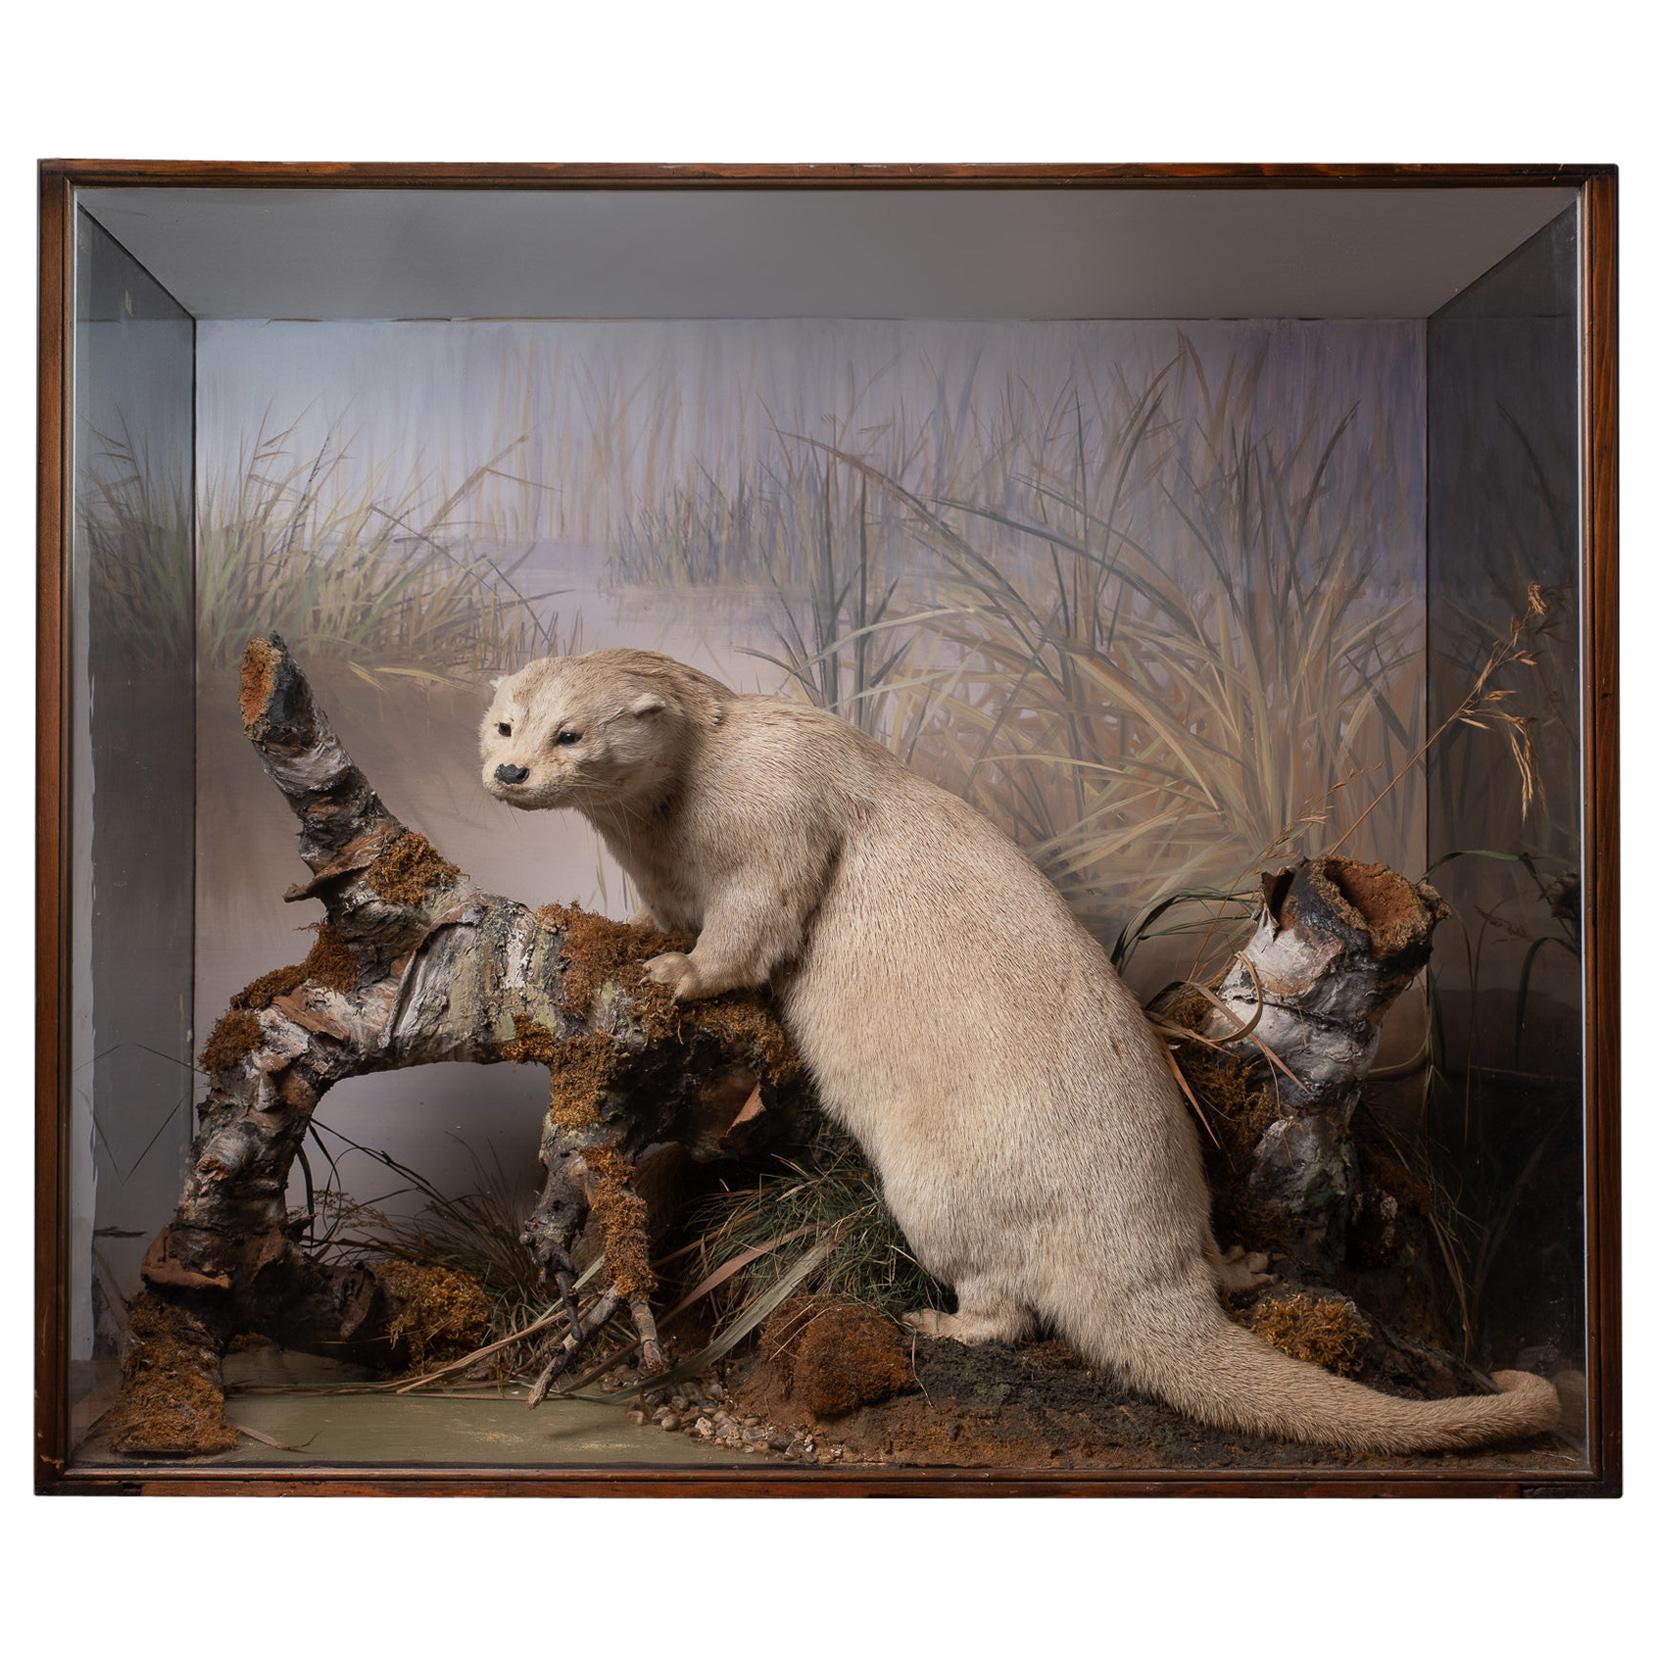 Artful Diorama with Full Mount European Otter 'Lutra Lutra' by Peter Spicer